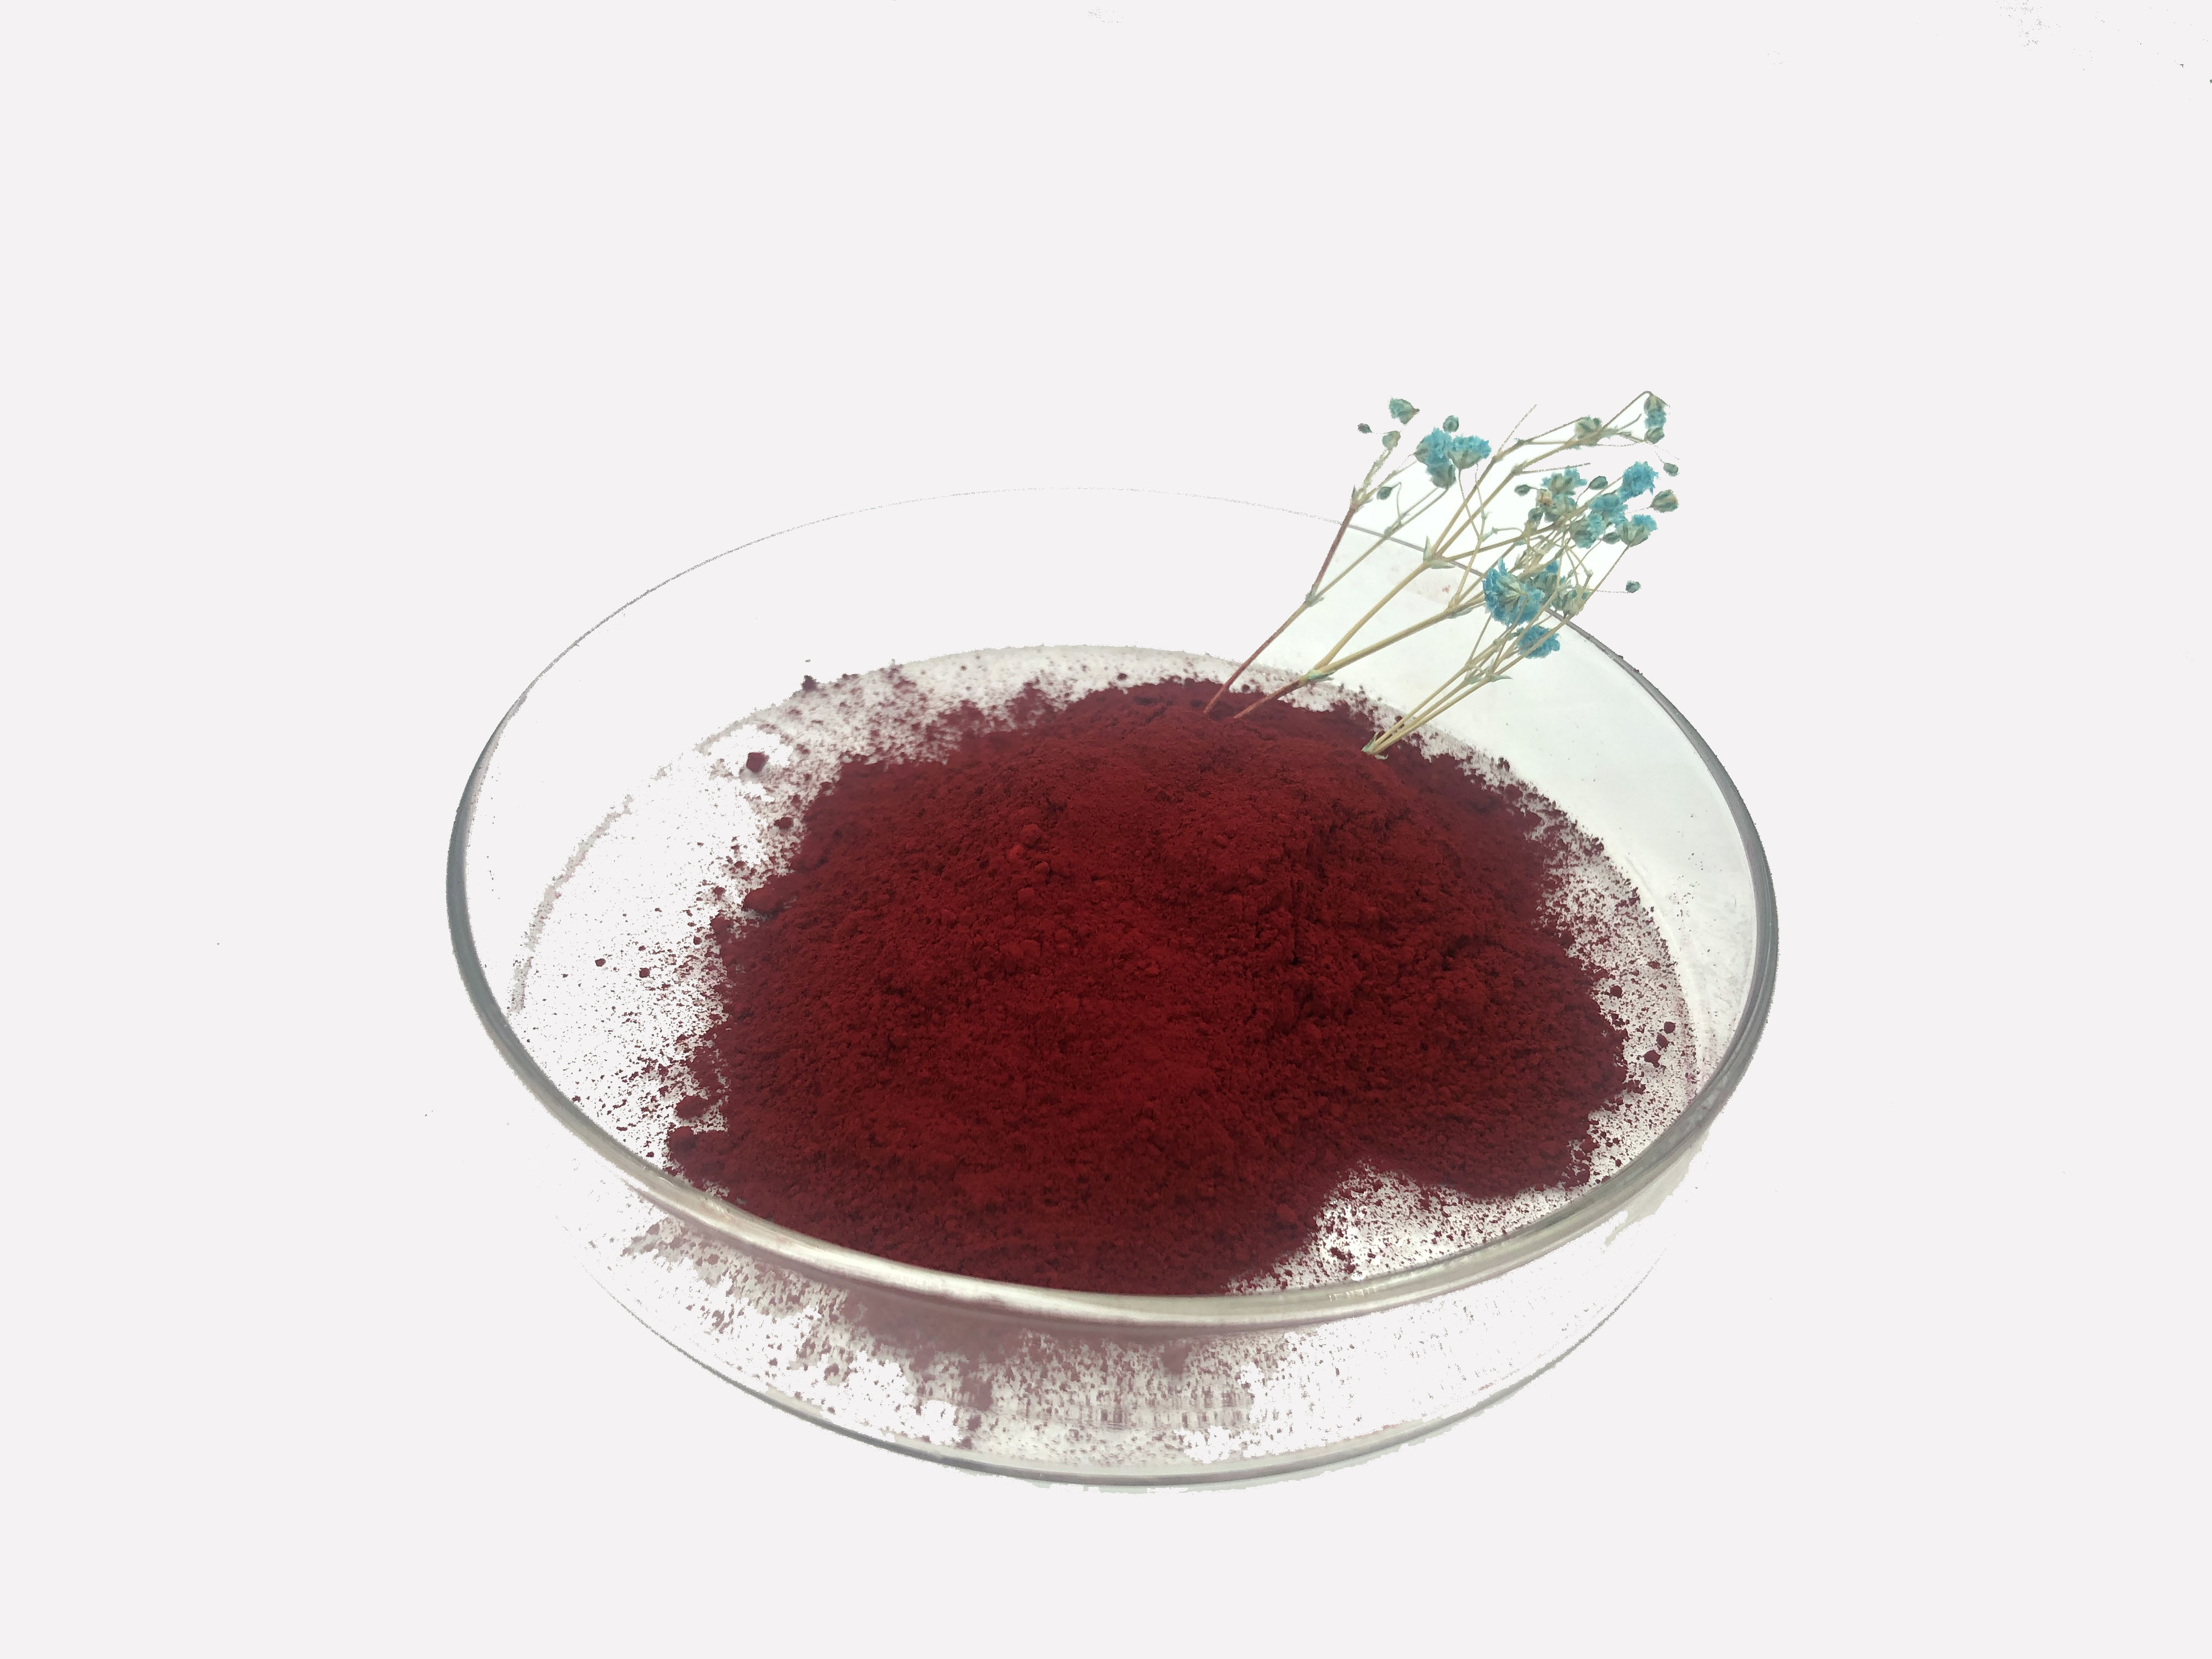 Pigment Red 185 Organic Powder Permanent Carmine Benzimidazolone Cermine HF4C CAS 51920-12-8 For Paint Ink Rubber Plastic ABS